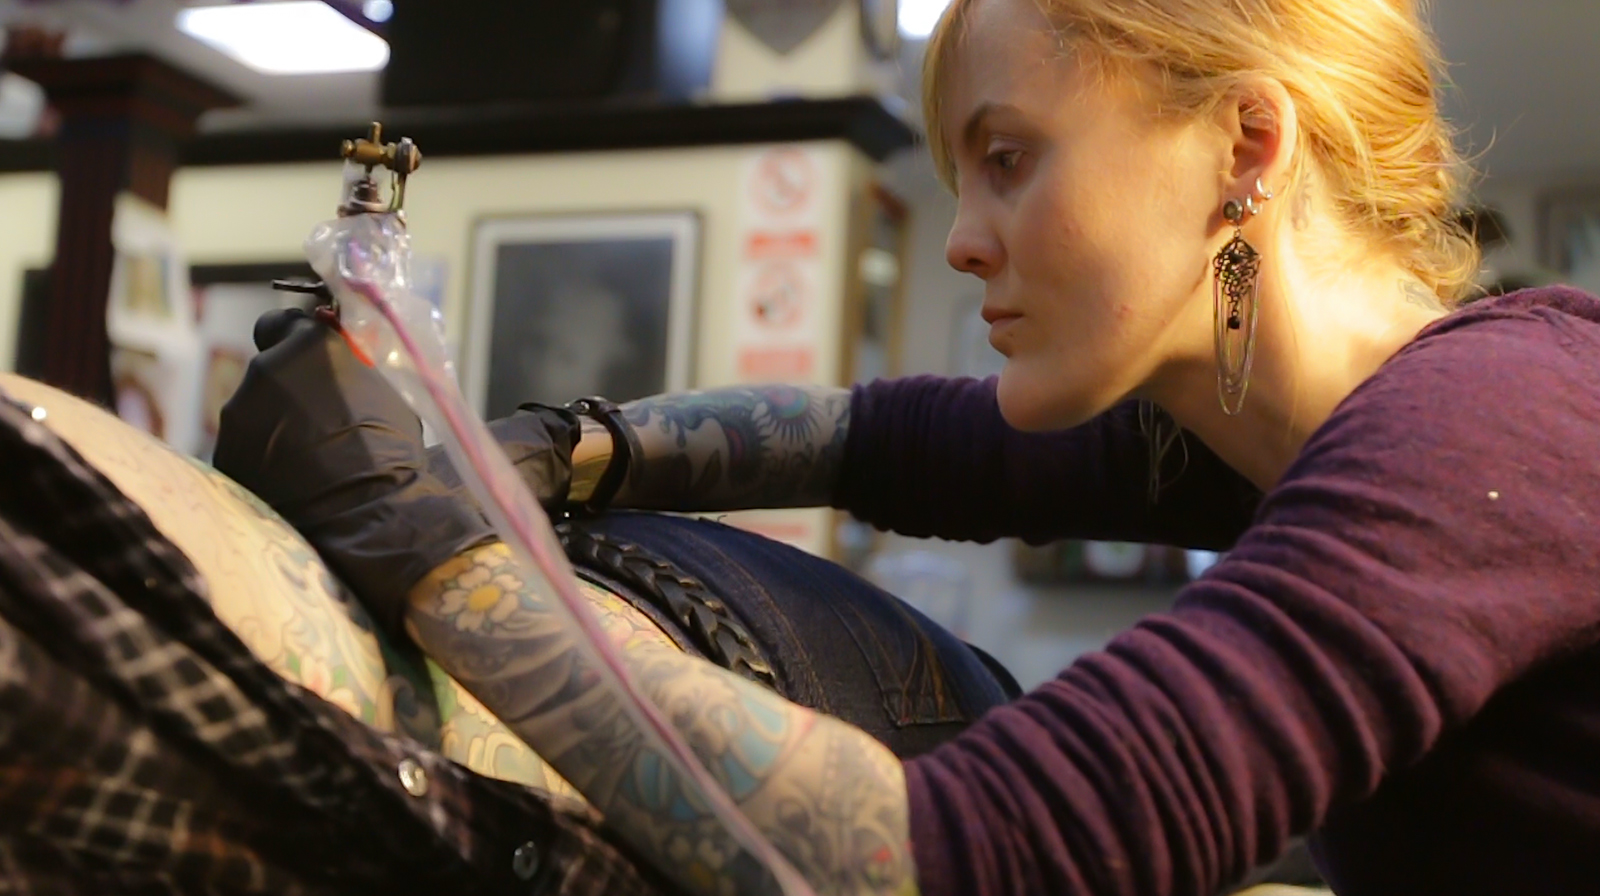 Female tattoo artists make their mark in Oakland | Oakland North